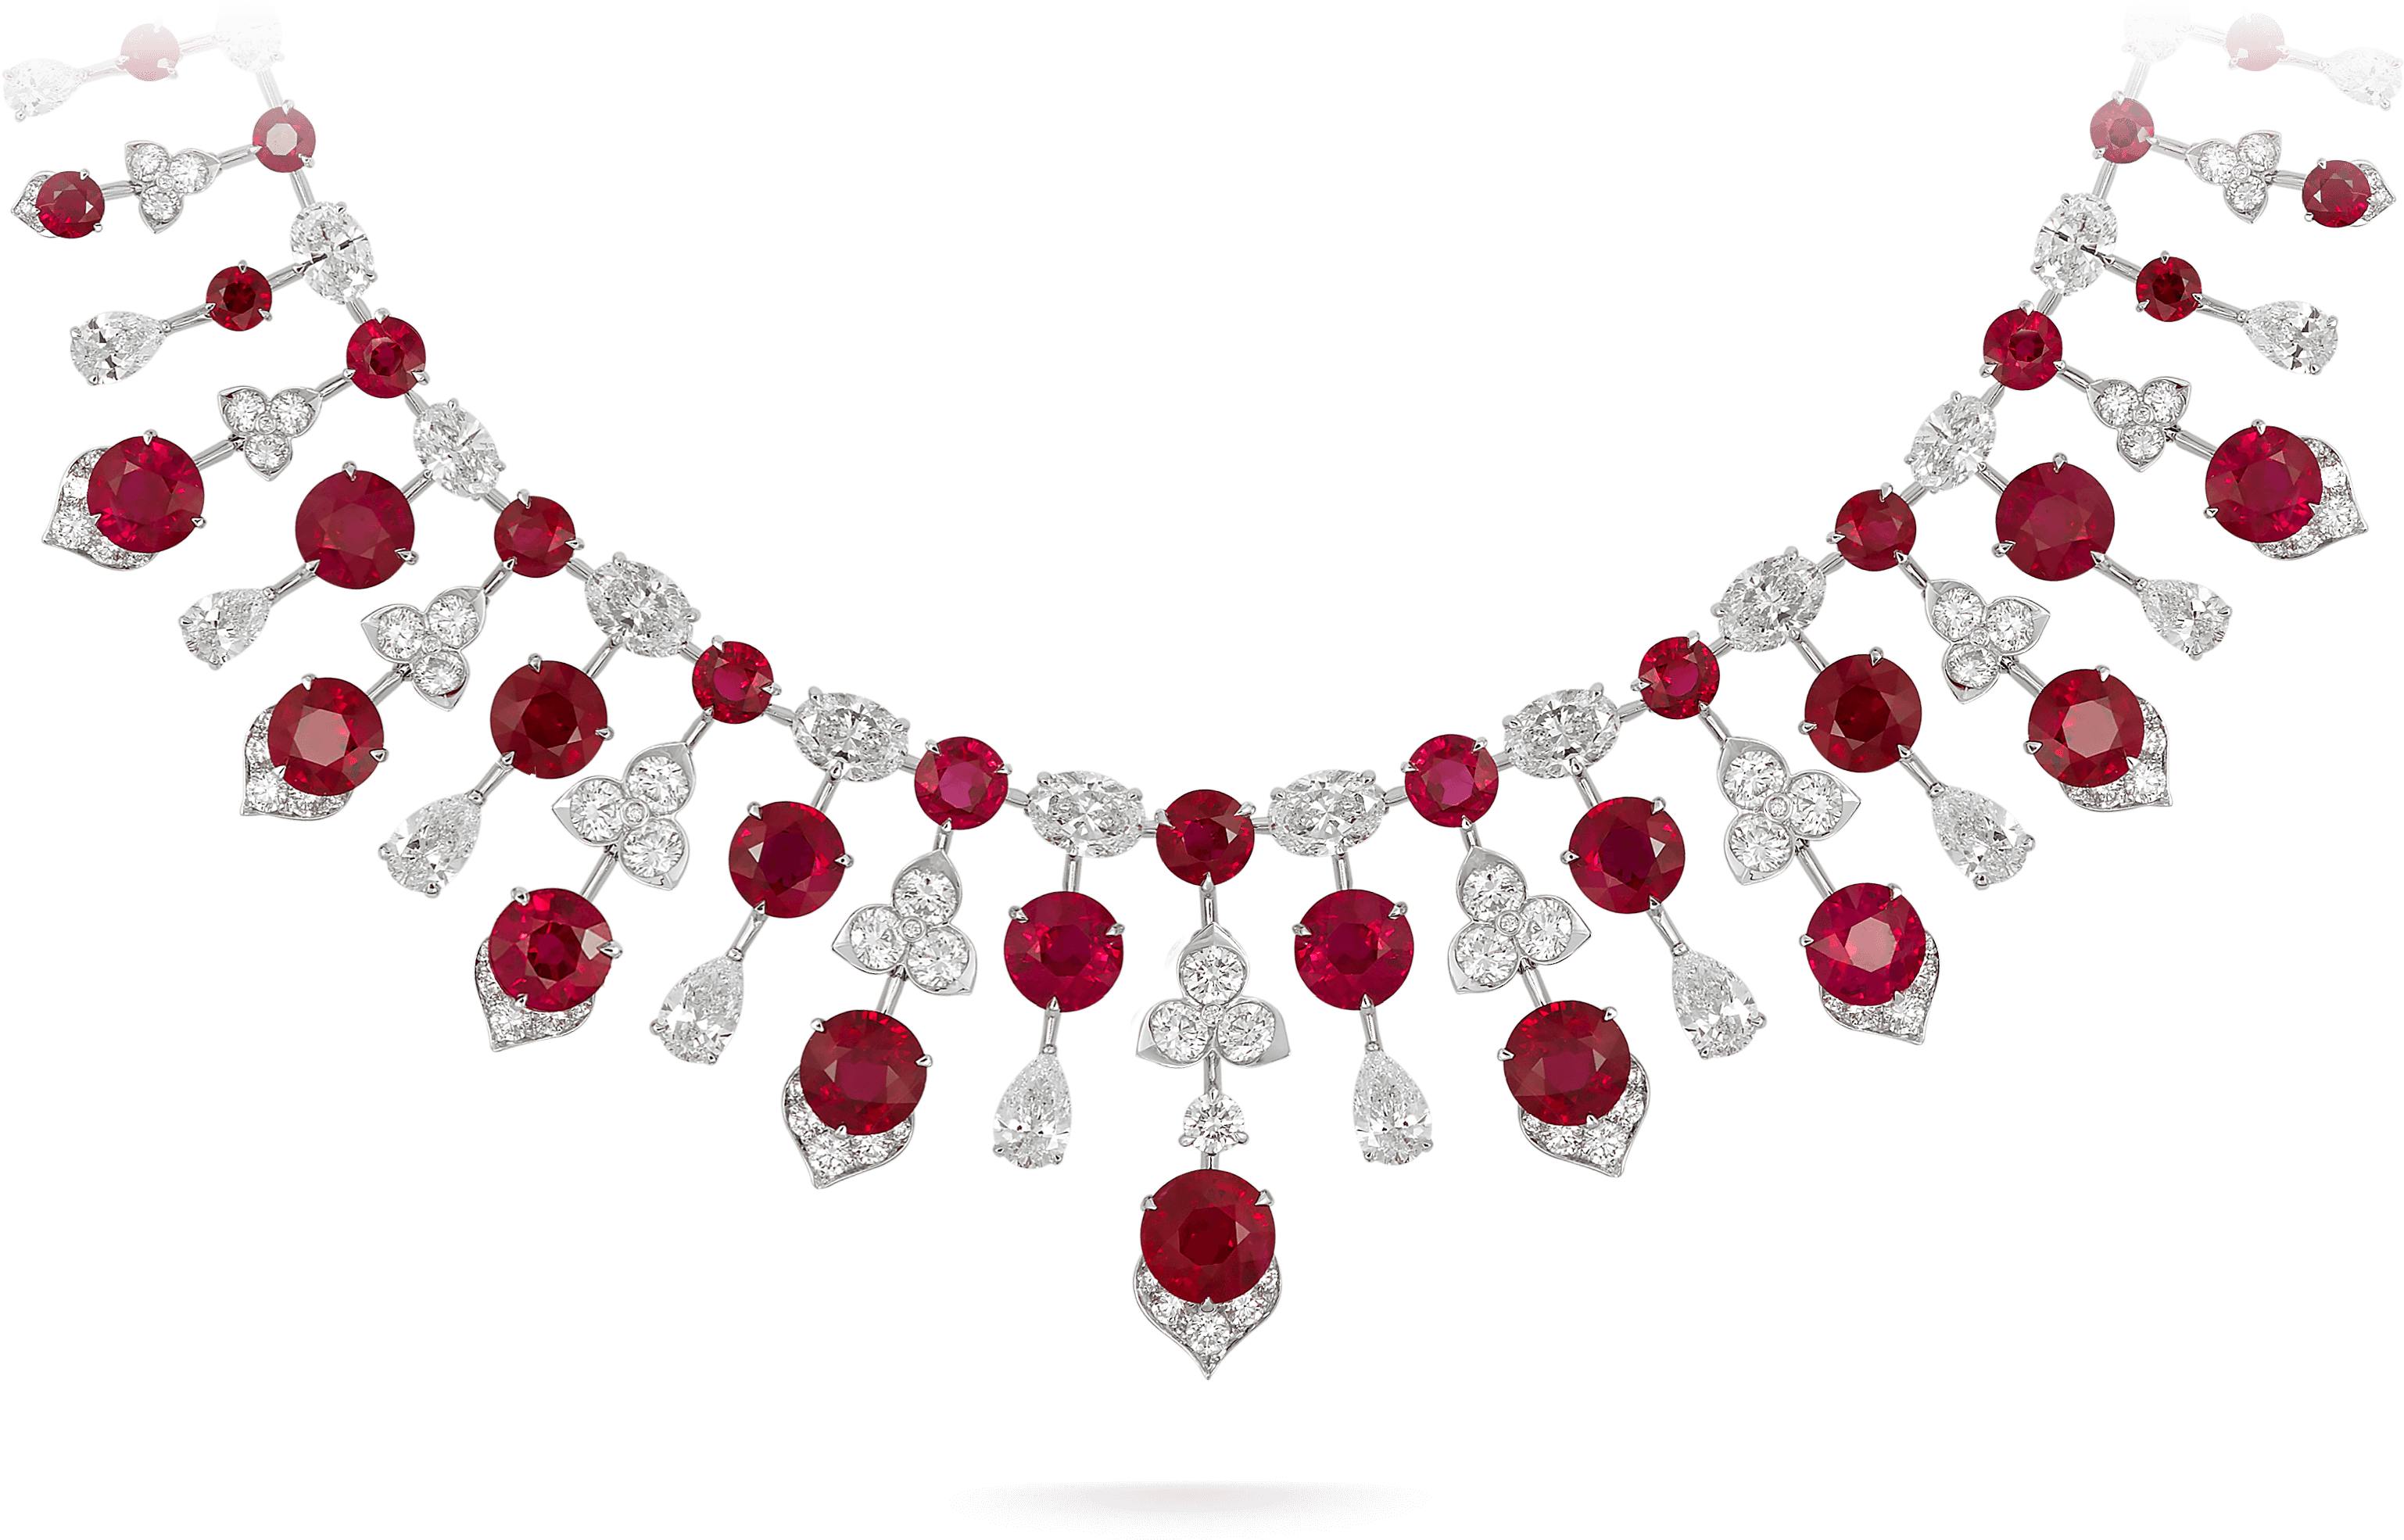 Necklace PNG High Quality Image